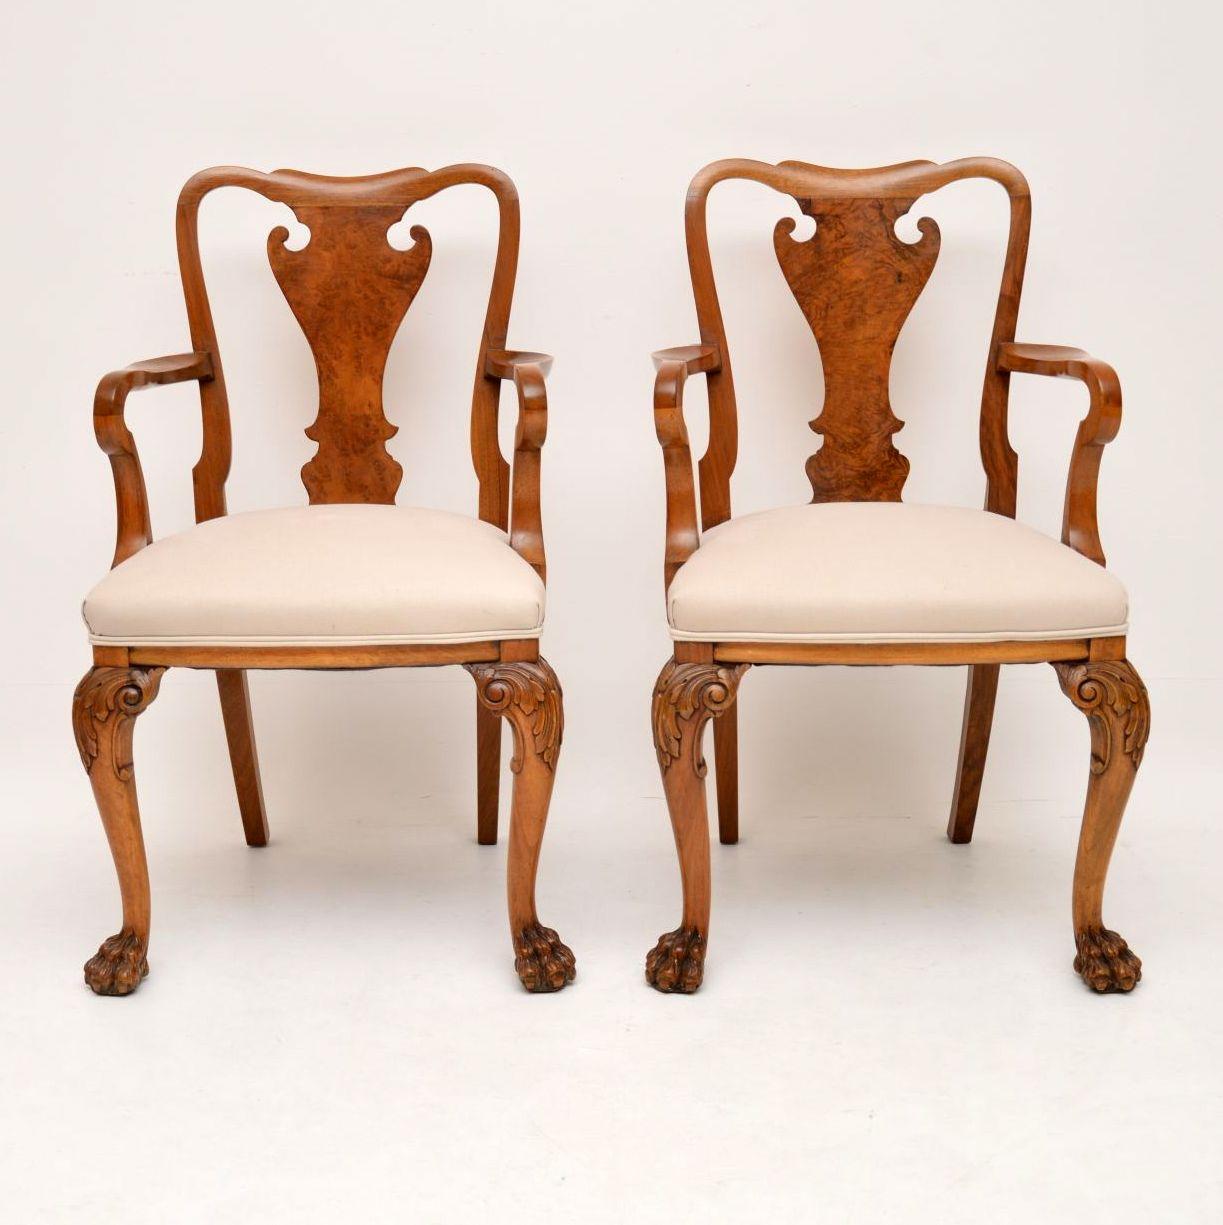 Fabulous quality pair of antique Queen Anne style solid walnut armchairs dating to circa 1920s period. They are in excellent condition, having just been French polished and re-upholstered. They have burr walnut urn shaped central splats, shepherd